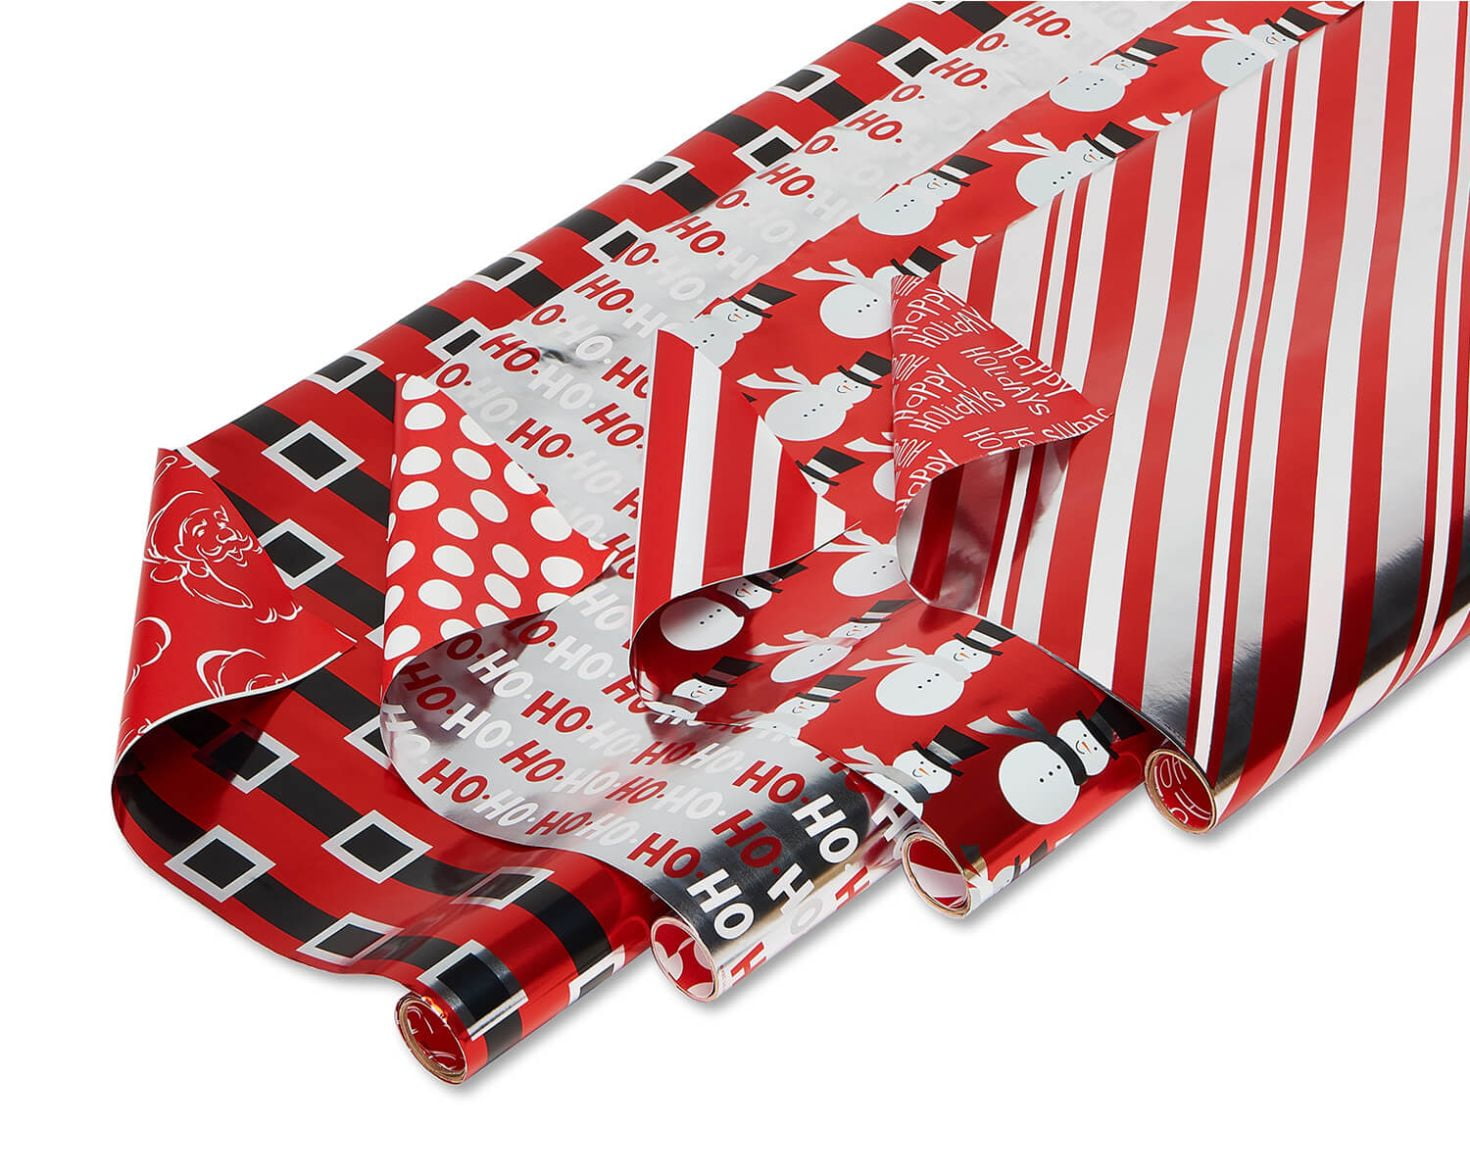 American Greetings 175 Sq. ft. Red Christmas Wrapping Paper, Candy Cane Stripes and Snowflakes (1 Jumbo Roll 30 in. x 70 ft.)